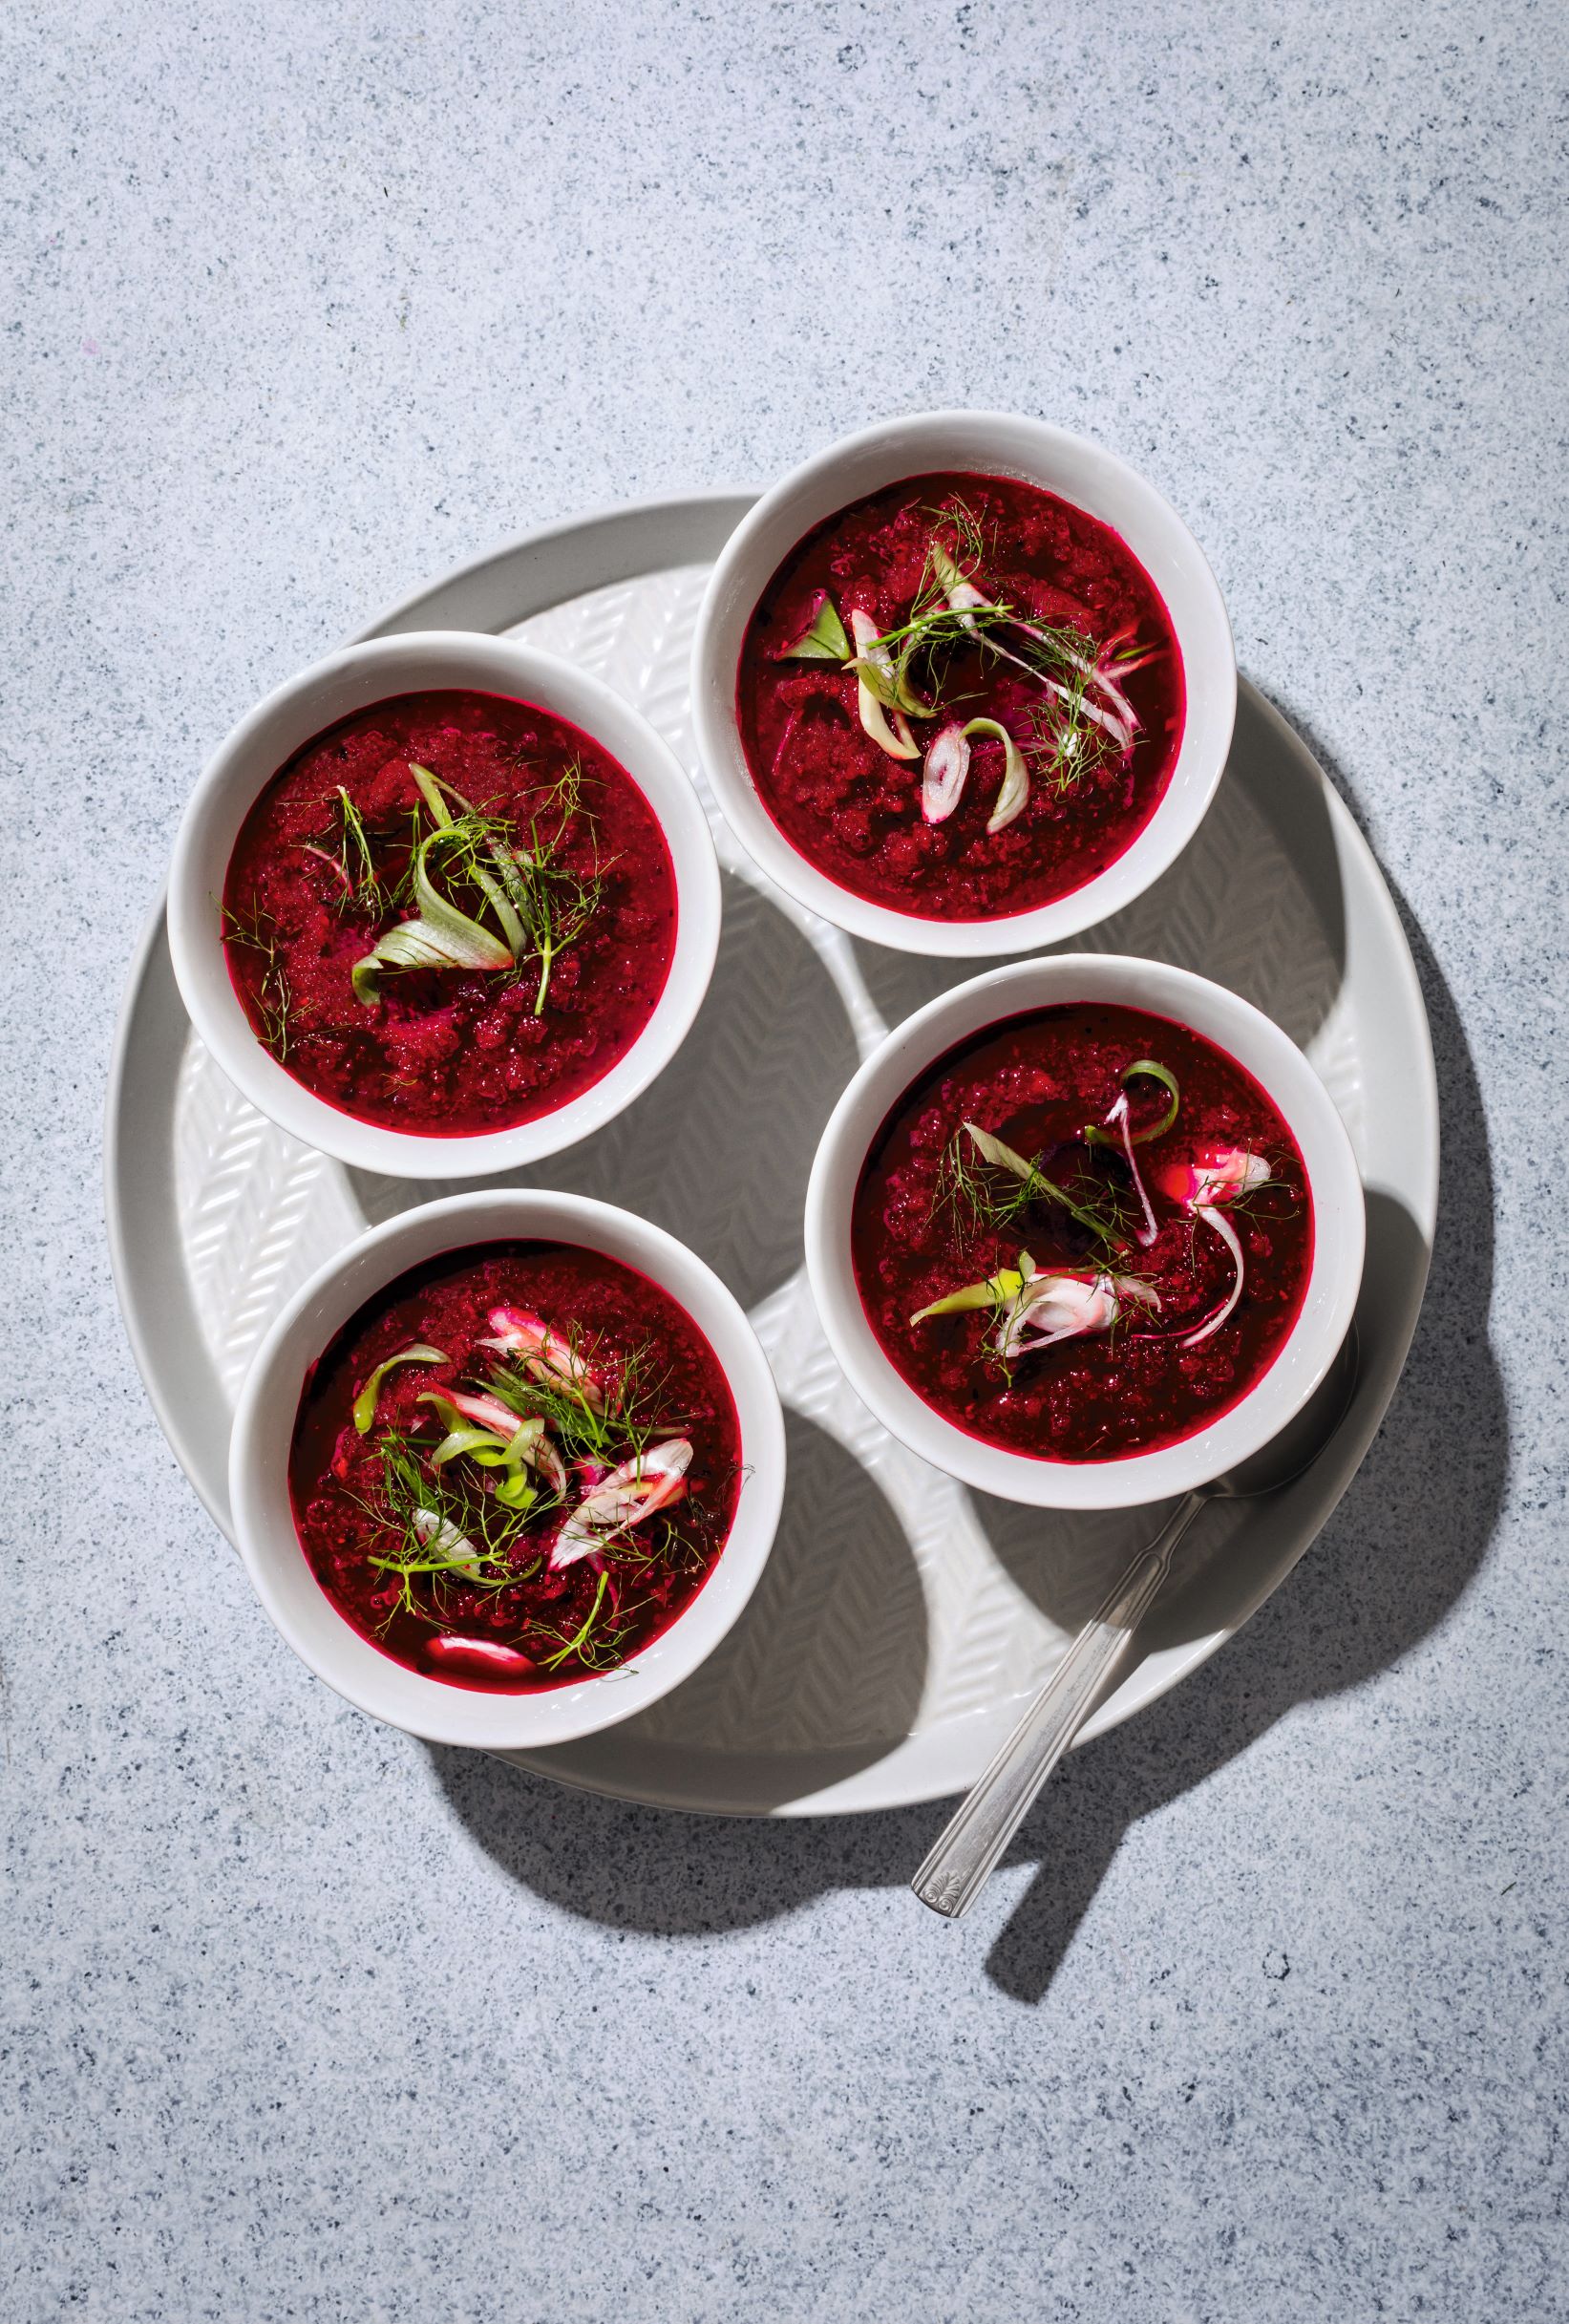 Beet and Fennel Gazpacho, as featured in The Vegetarian Silver Spoon